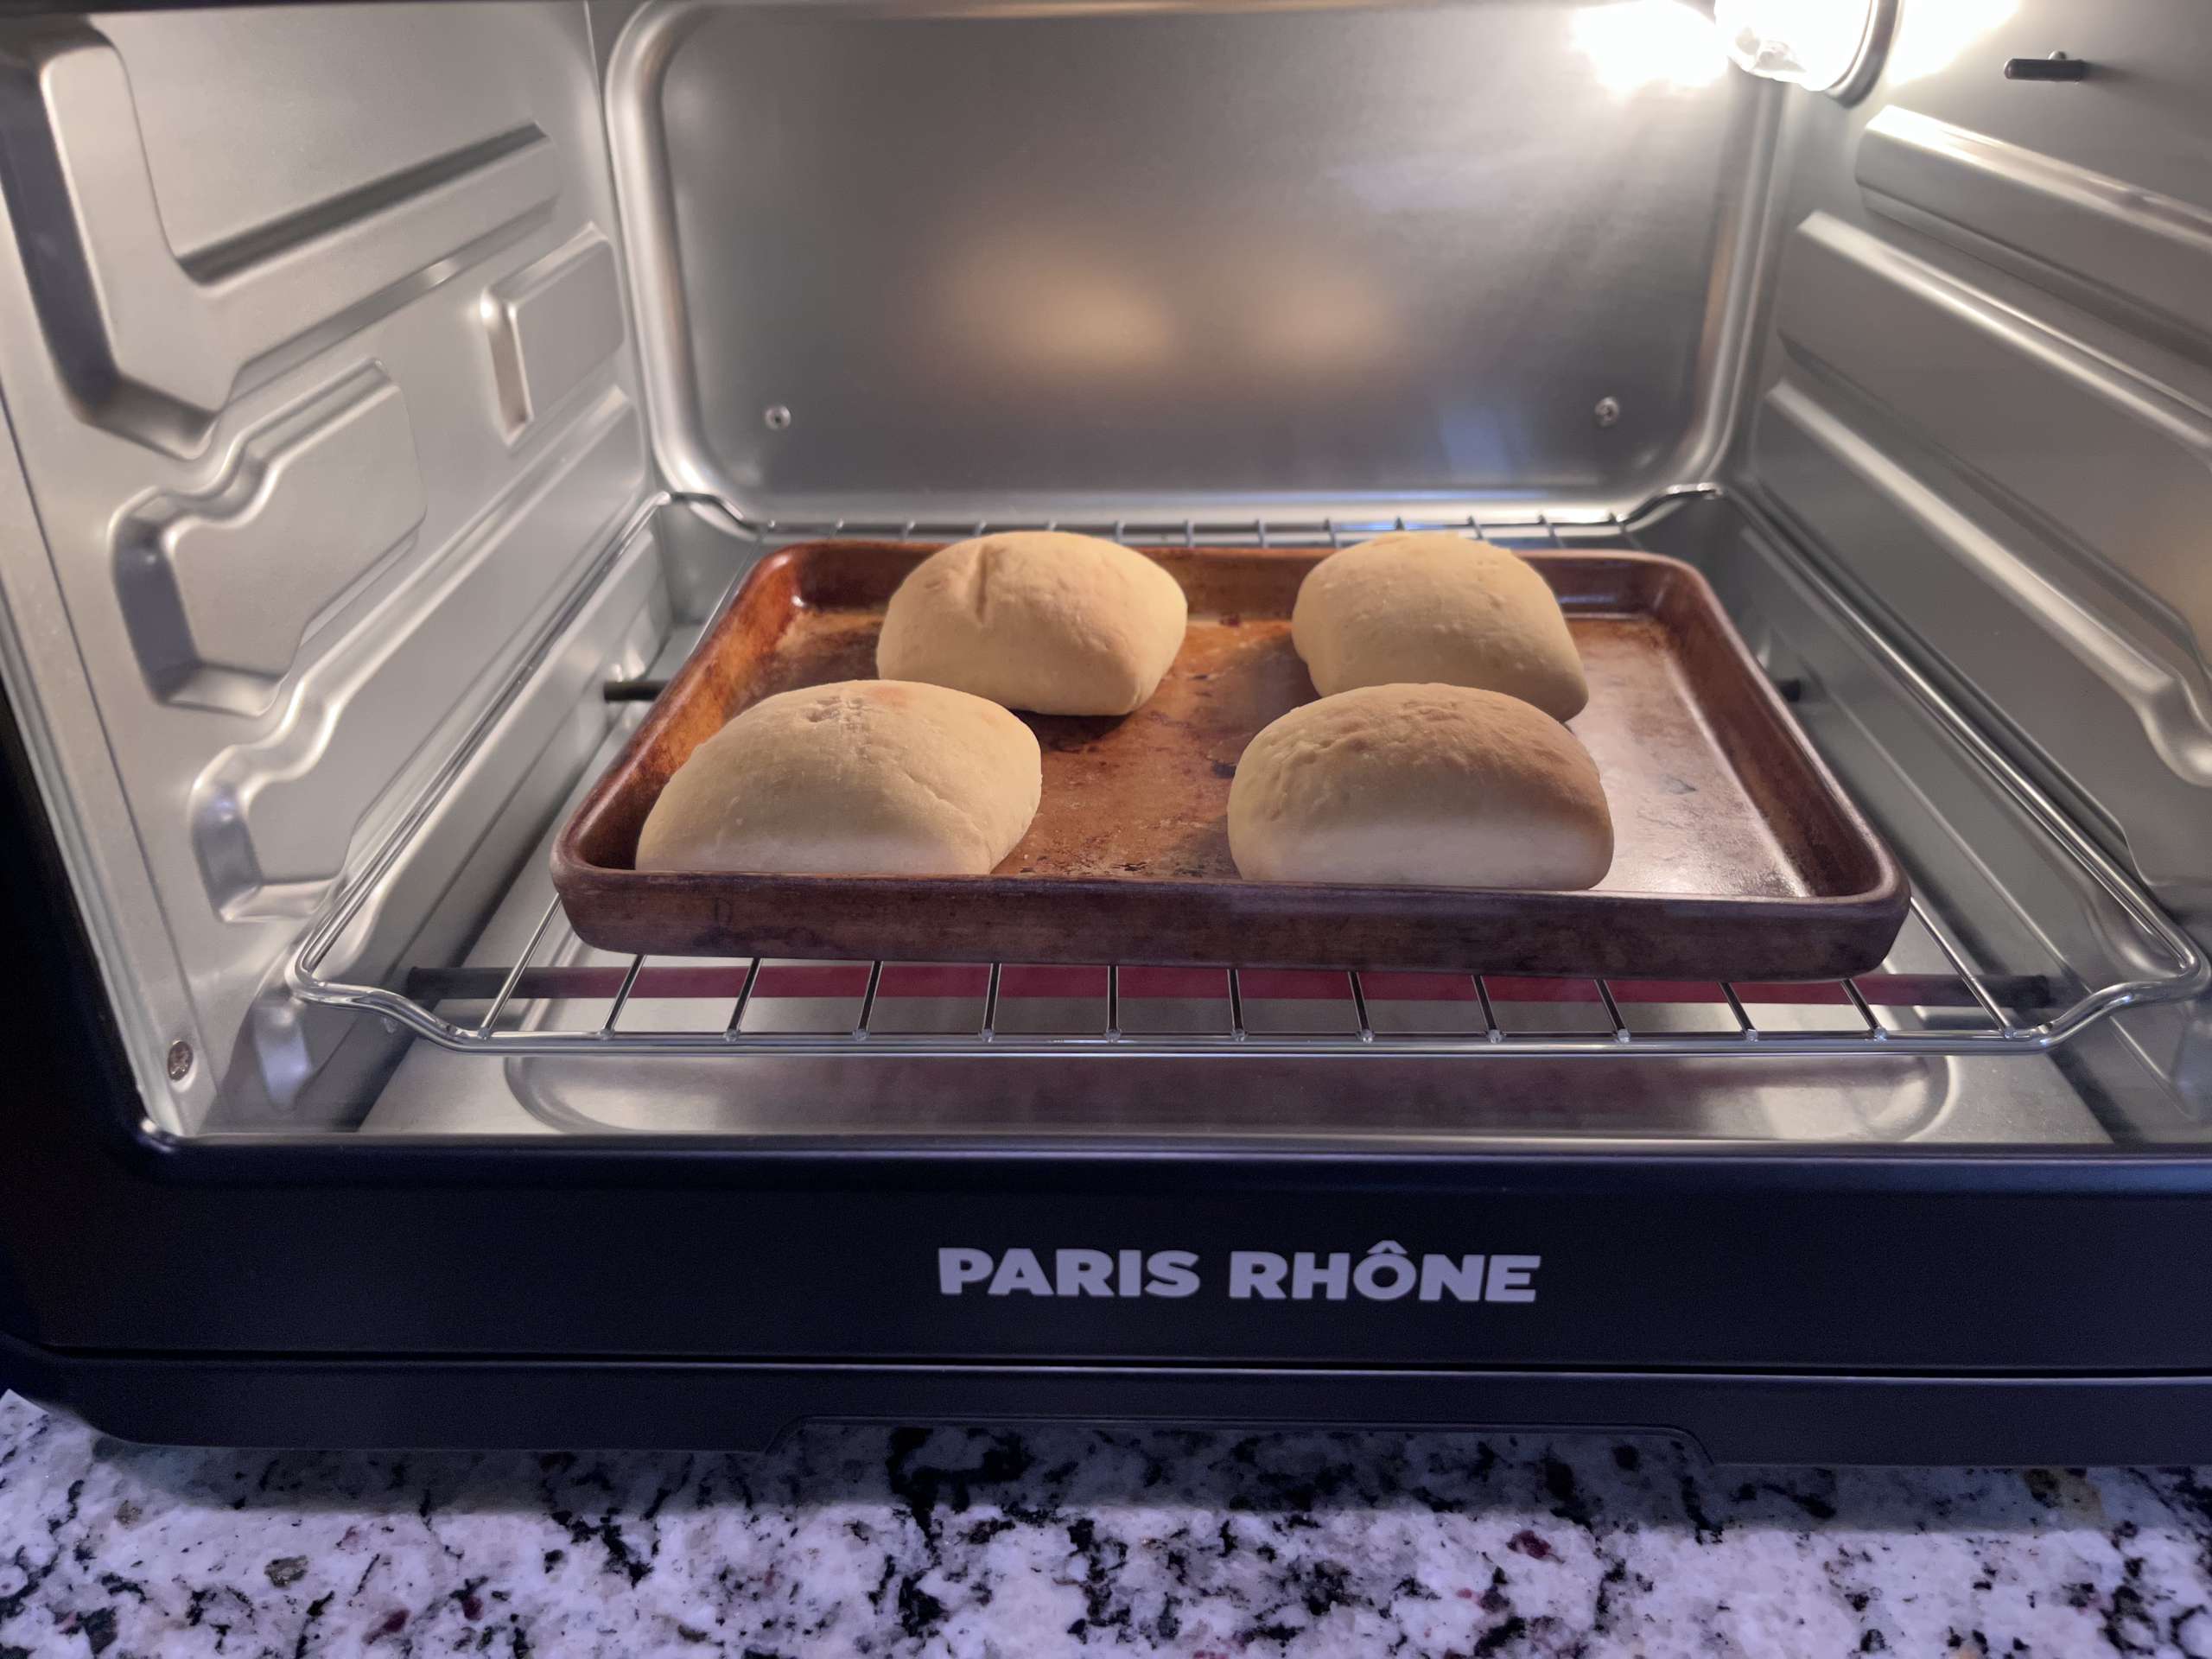 PARIS RHÔNE Air Fryer Toaster Oven Combo review - the almost